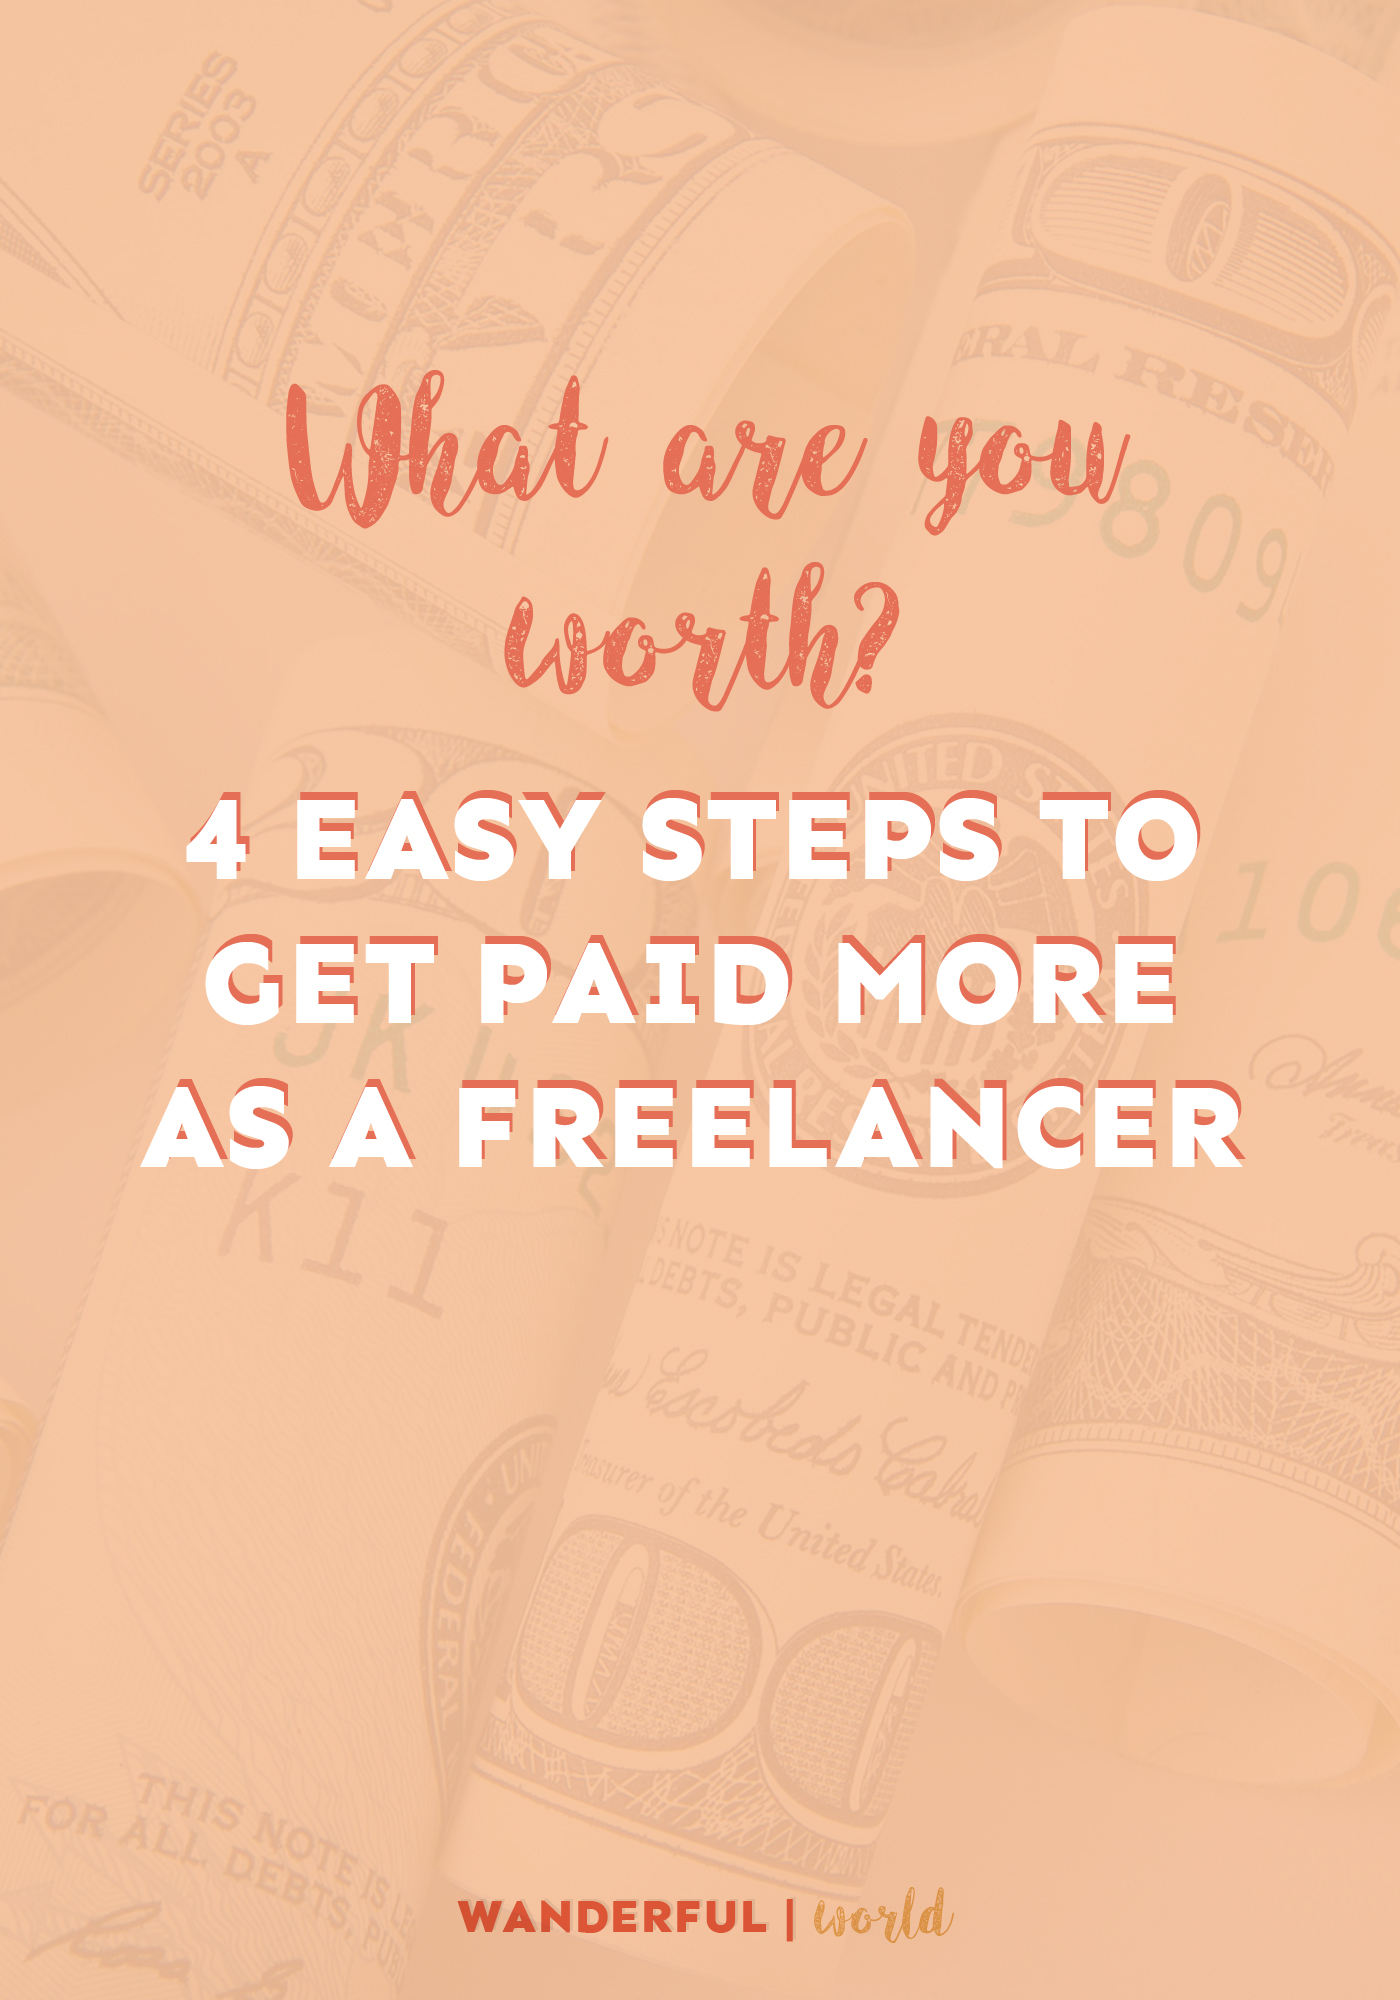 Do you know what you're worth as a freelancer? Do you want to raise your rates? Here are 4 steps you can take to do just that!